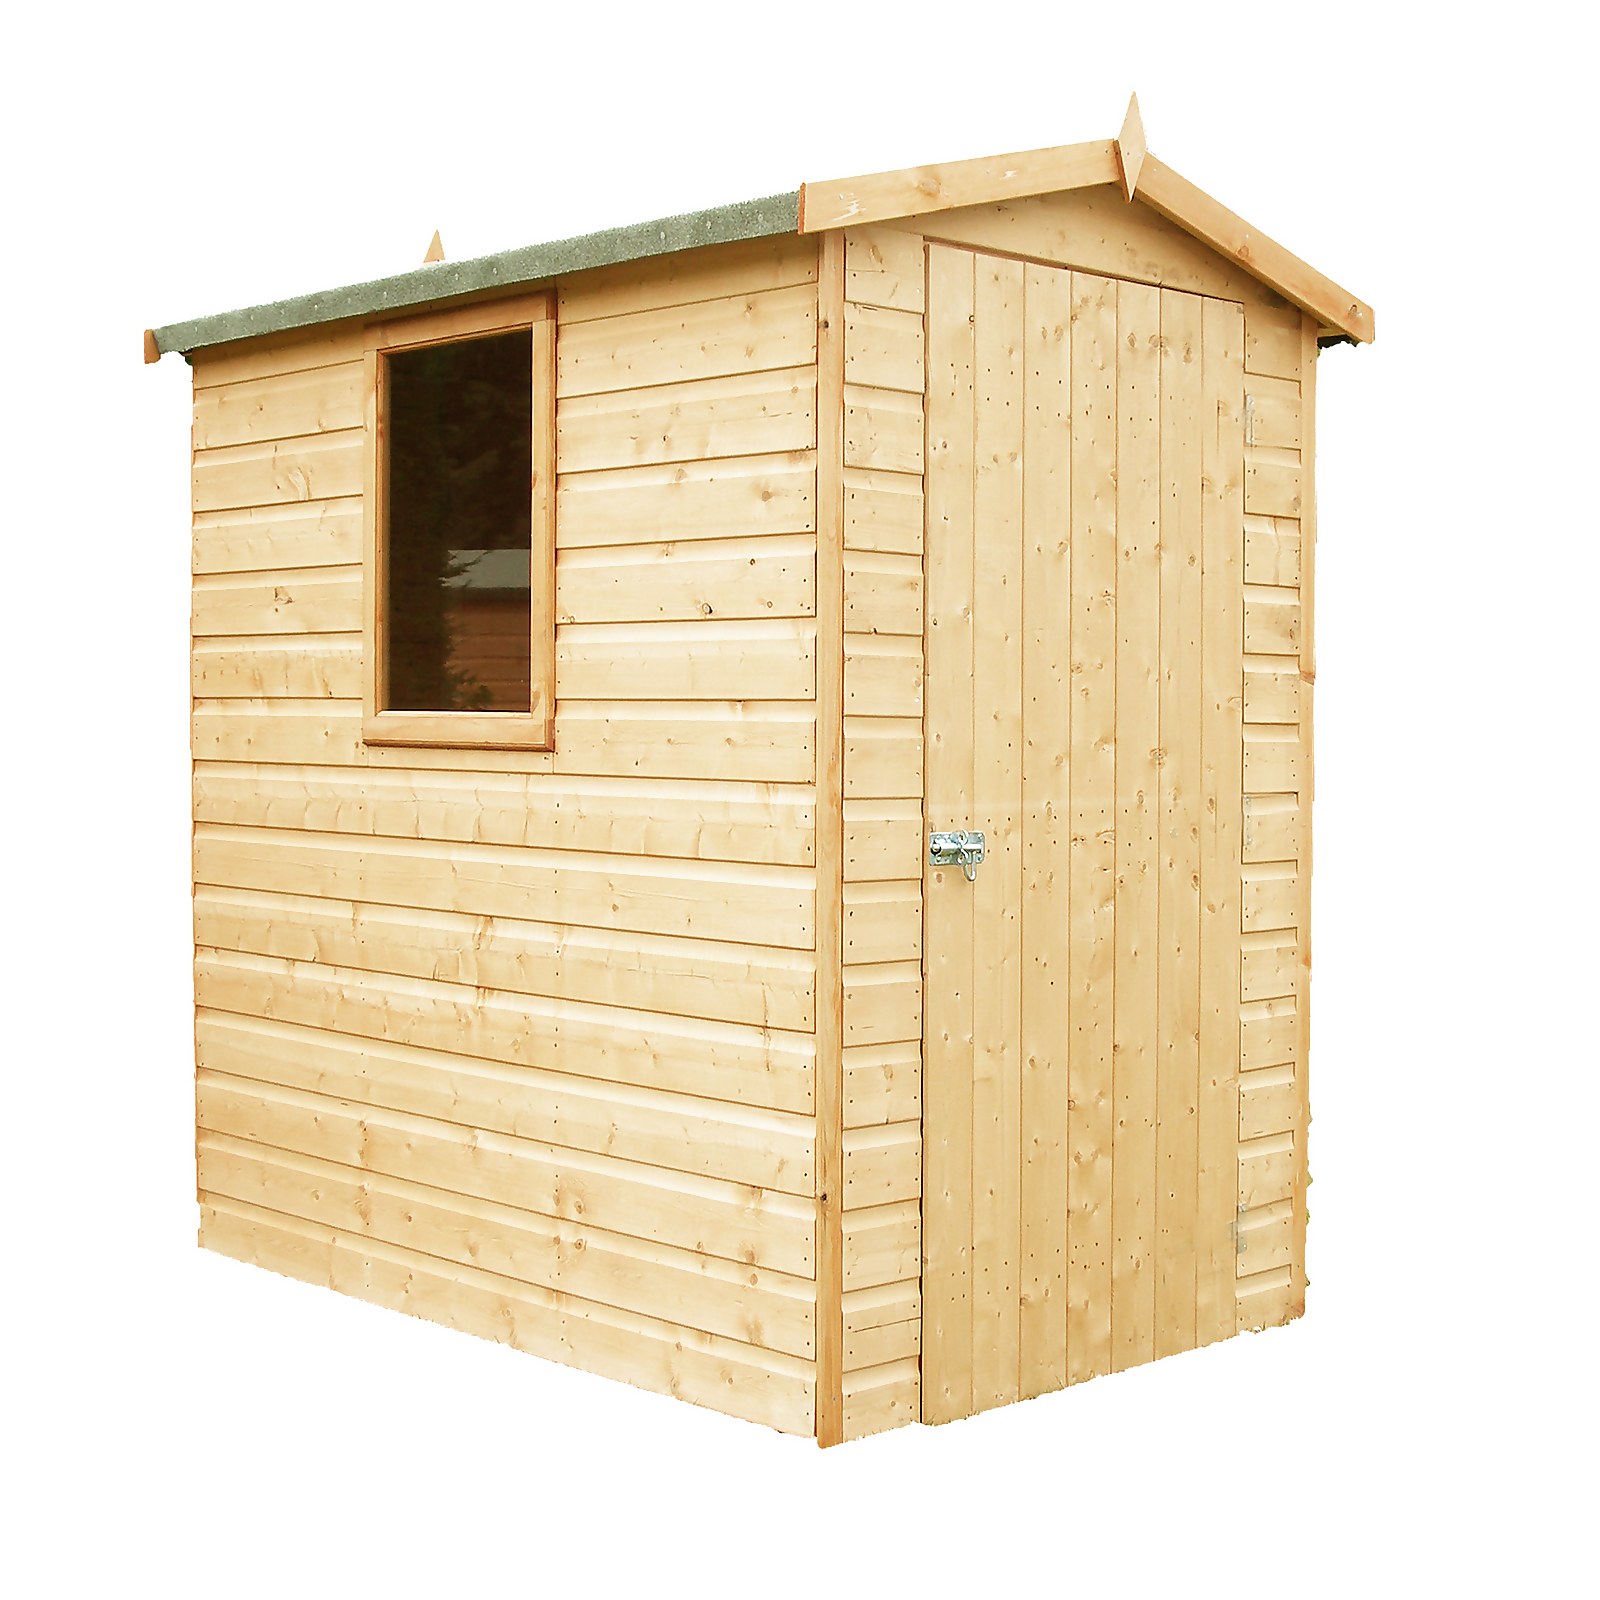 Shire 6 x 4ft Lewis Garden Shed - Including Installation